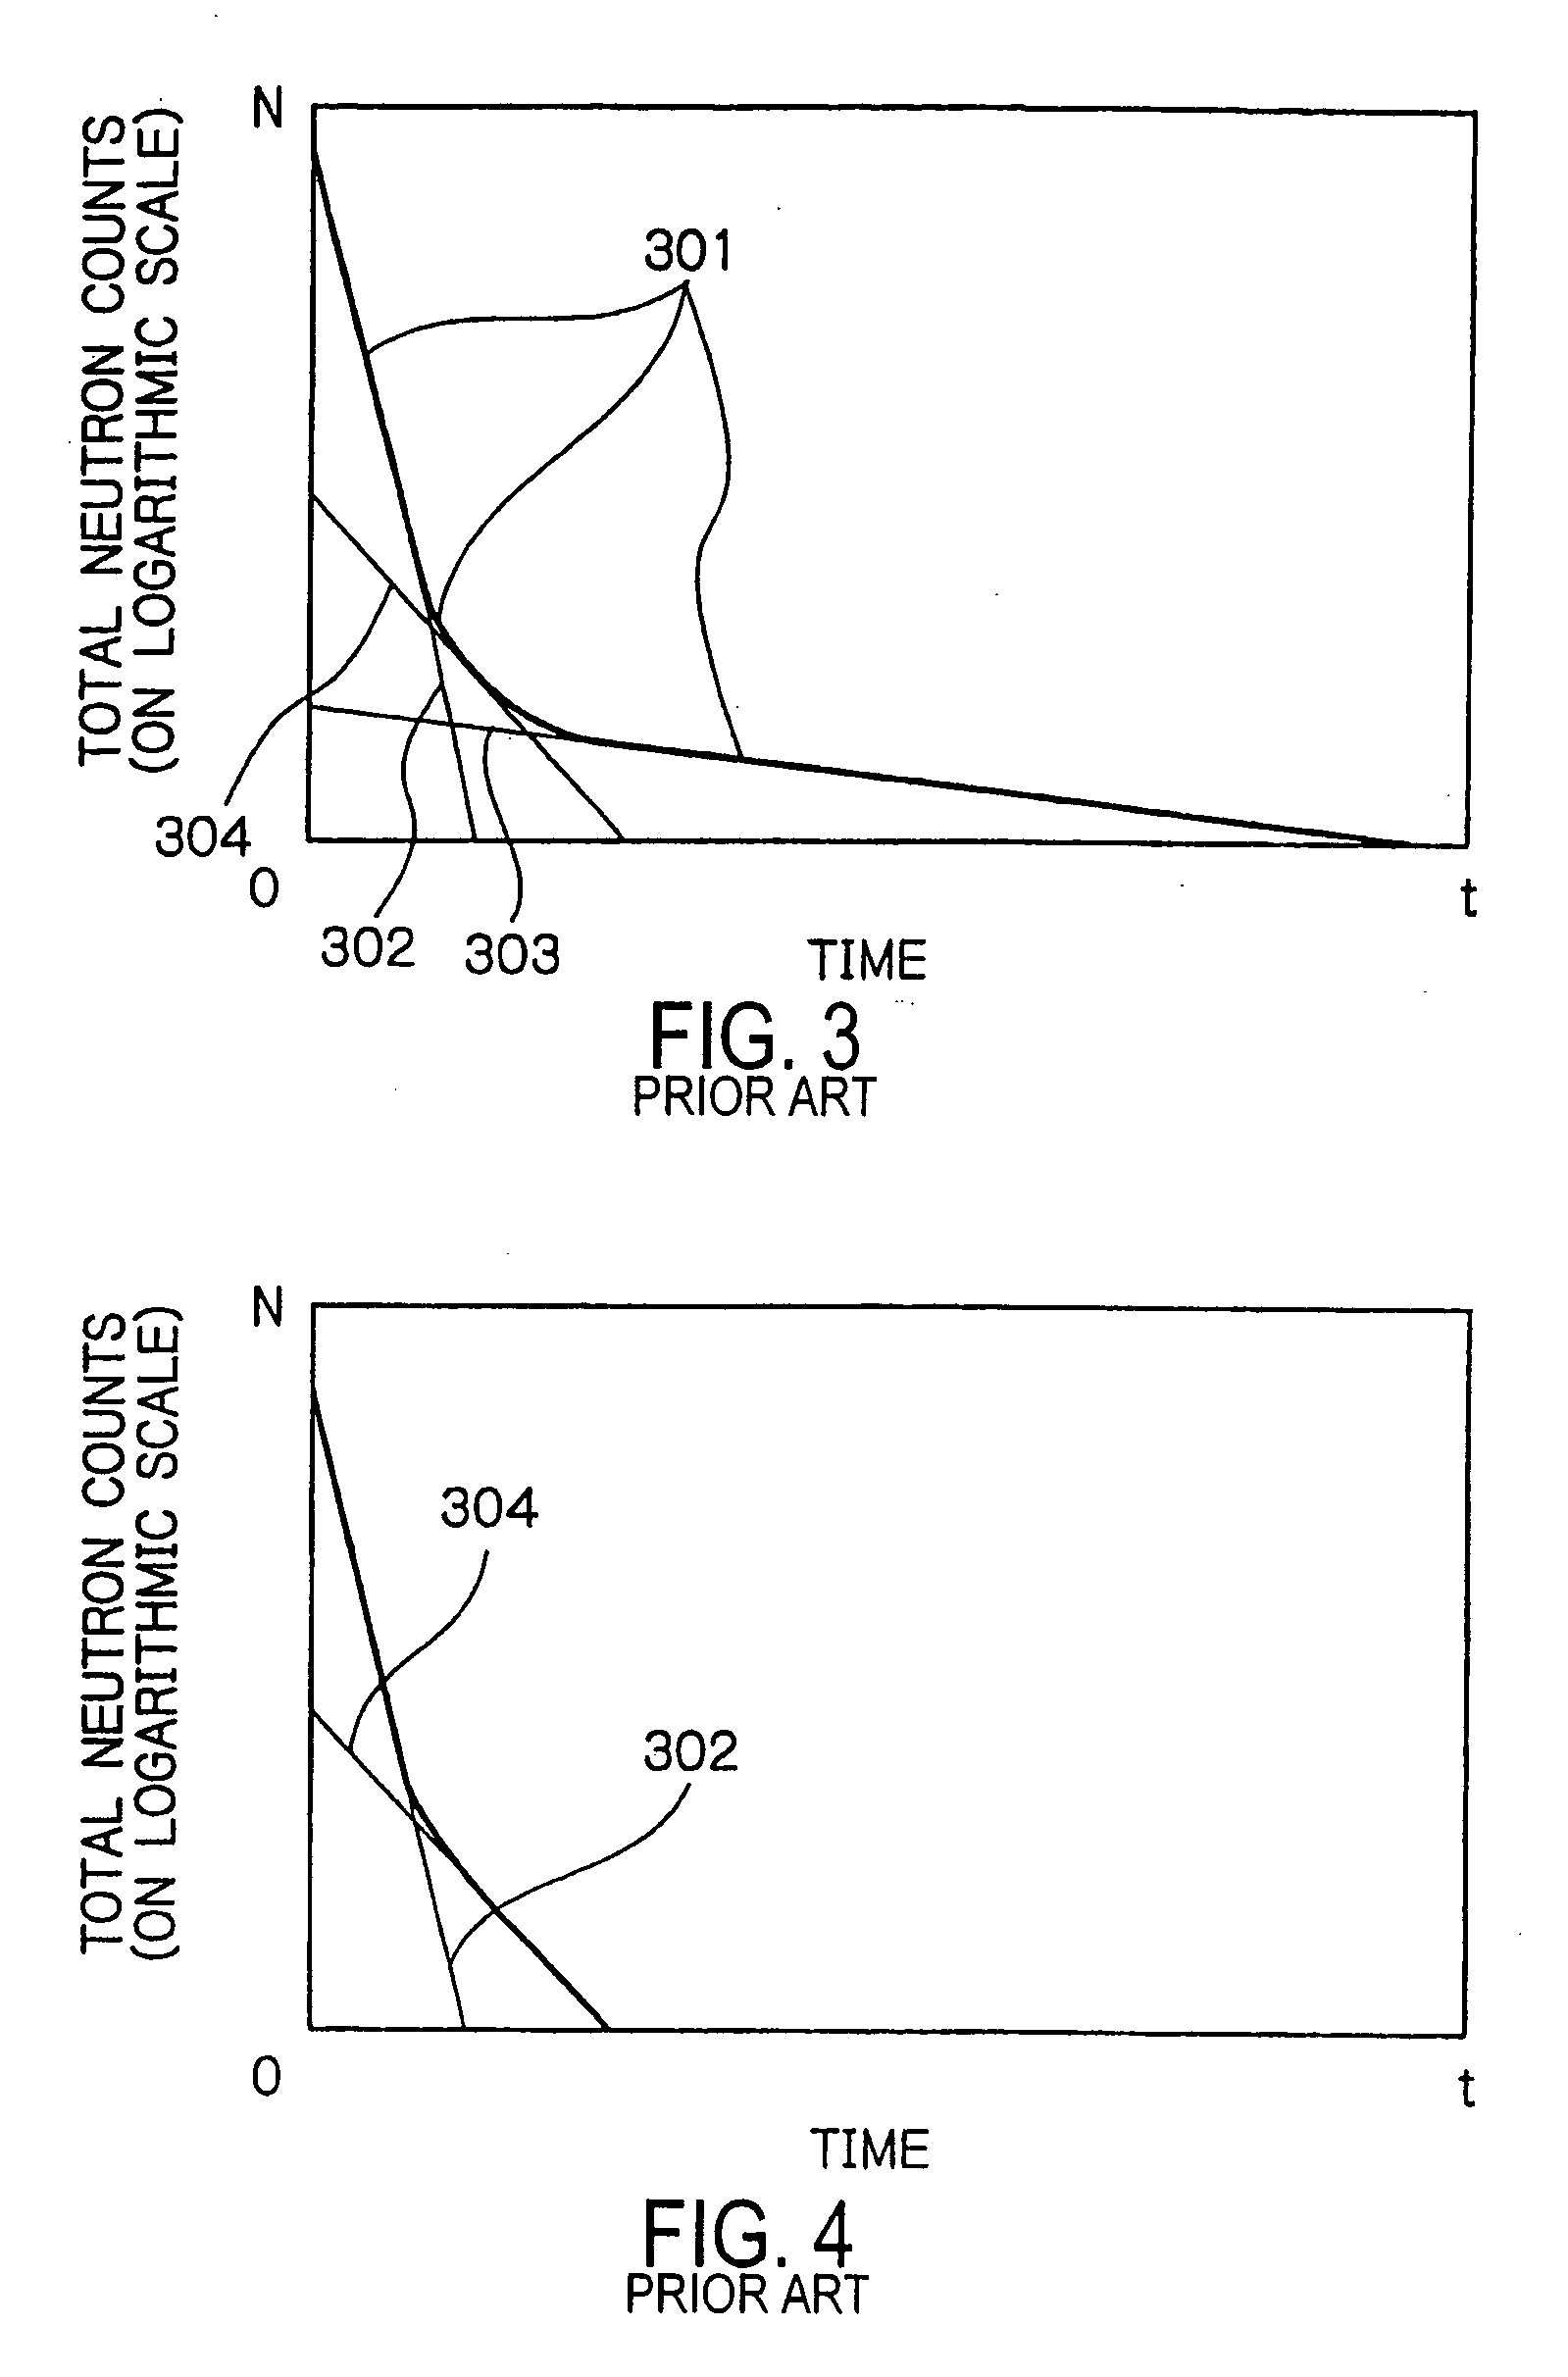 Apparatus for nondestructive measurement of fissle materials in solid radioactive wastes